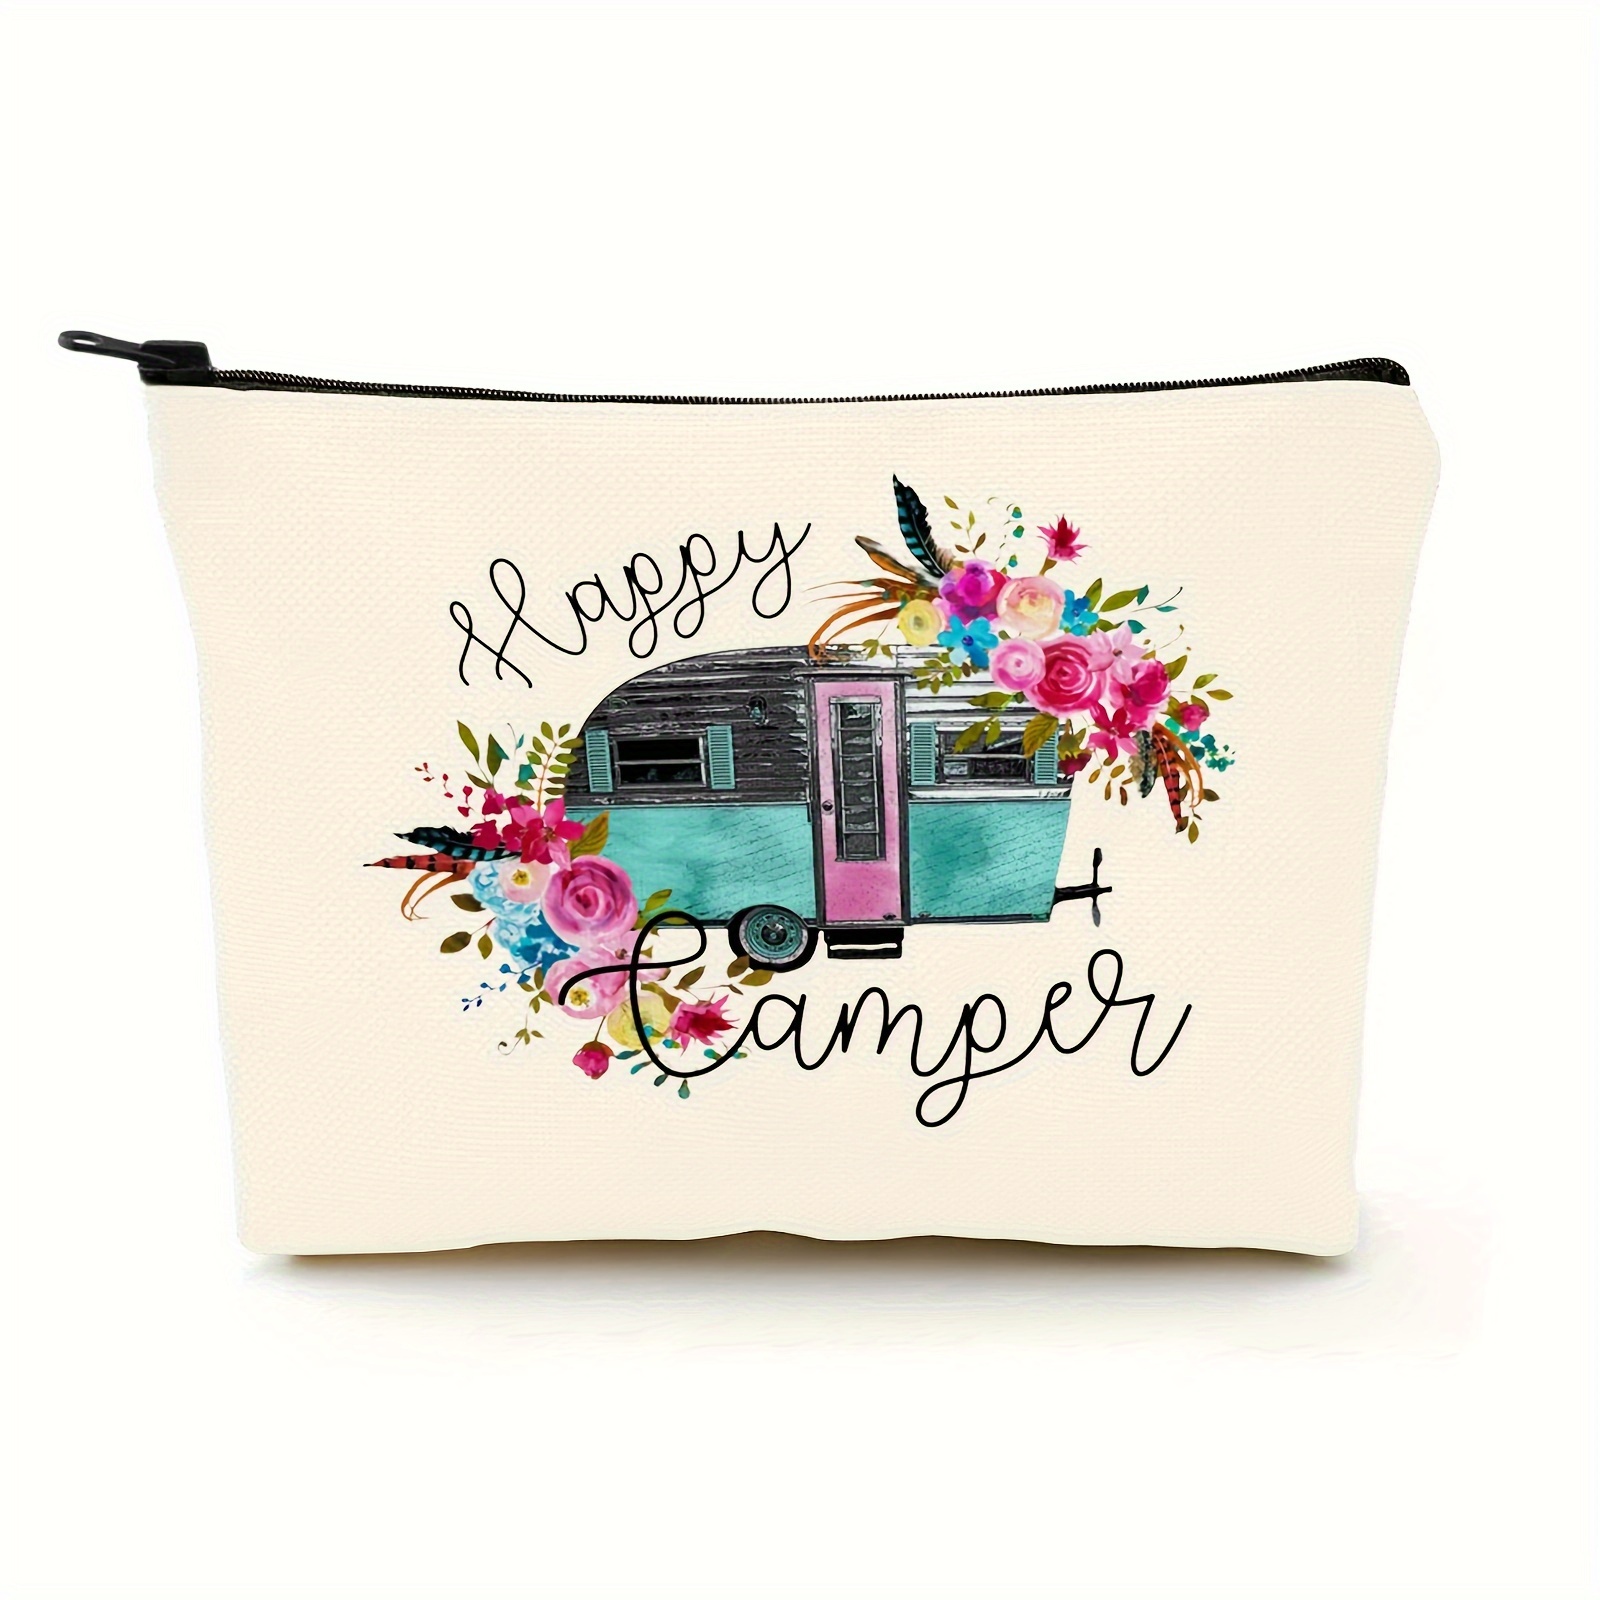 

Camper Accessories For Travel Makeup Bag, Gifts For Camper Camp Retro Camping Decorations